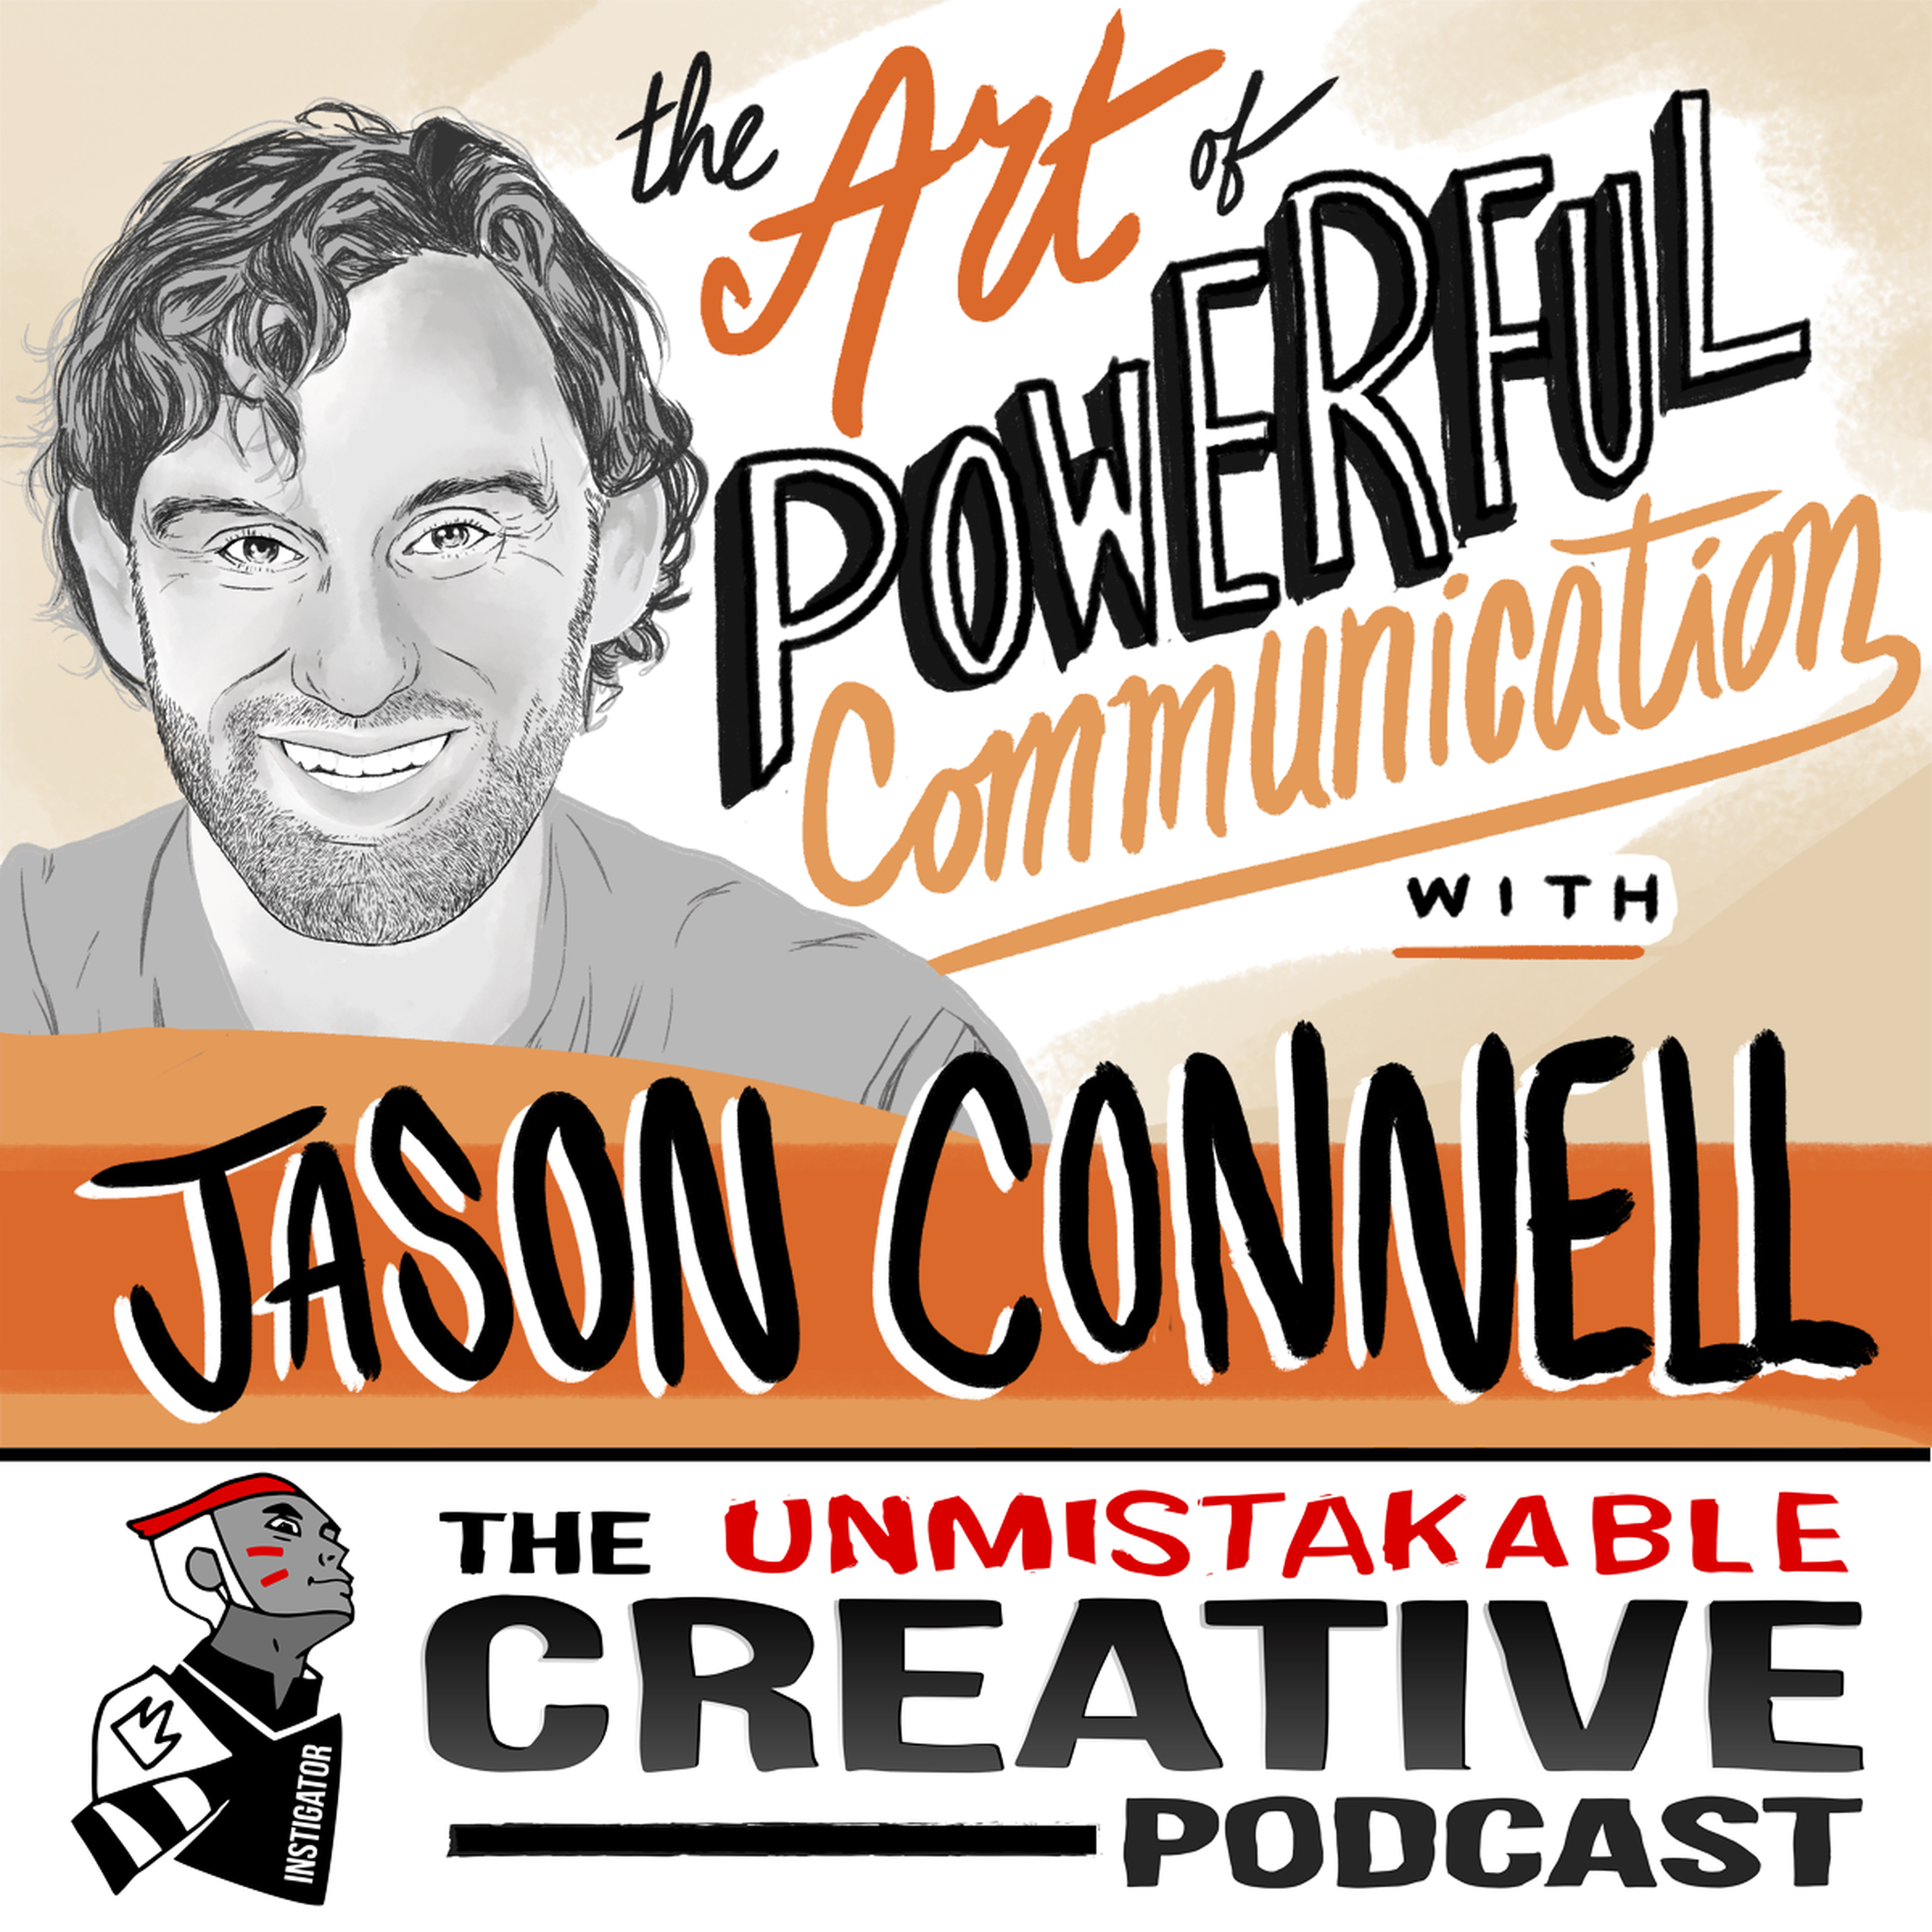 Jason Connell: The Art of Powerful Communication Image